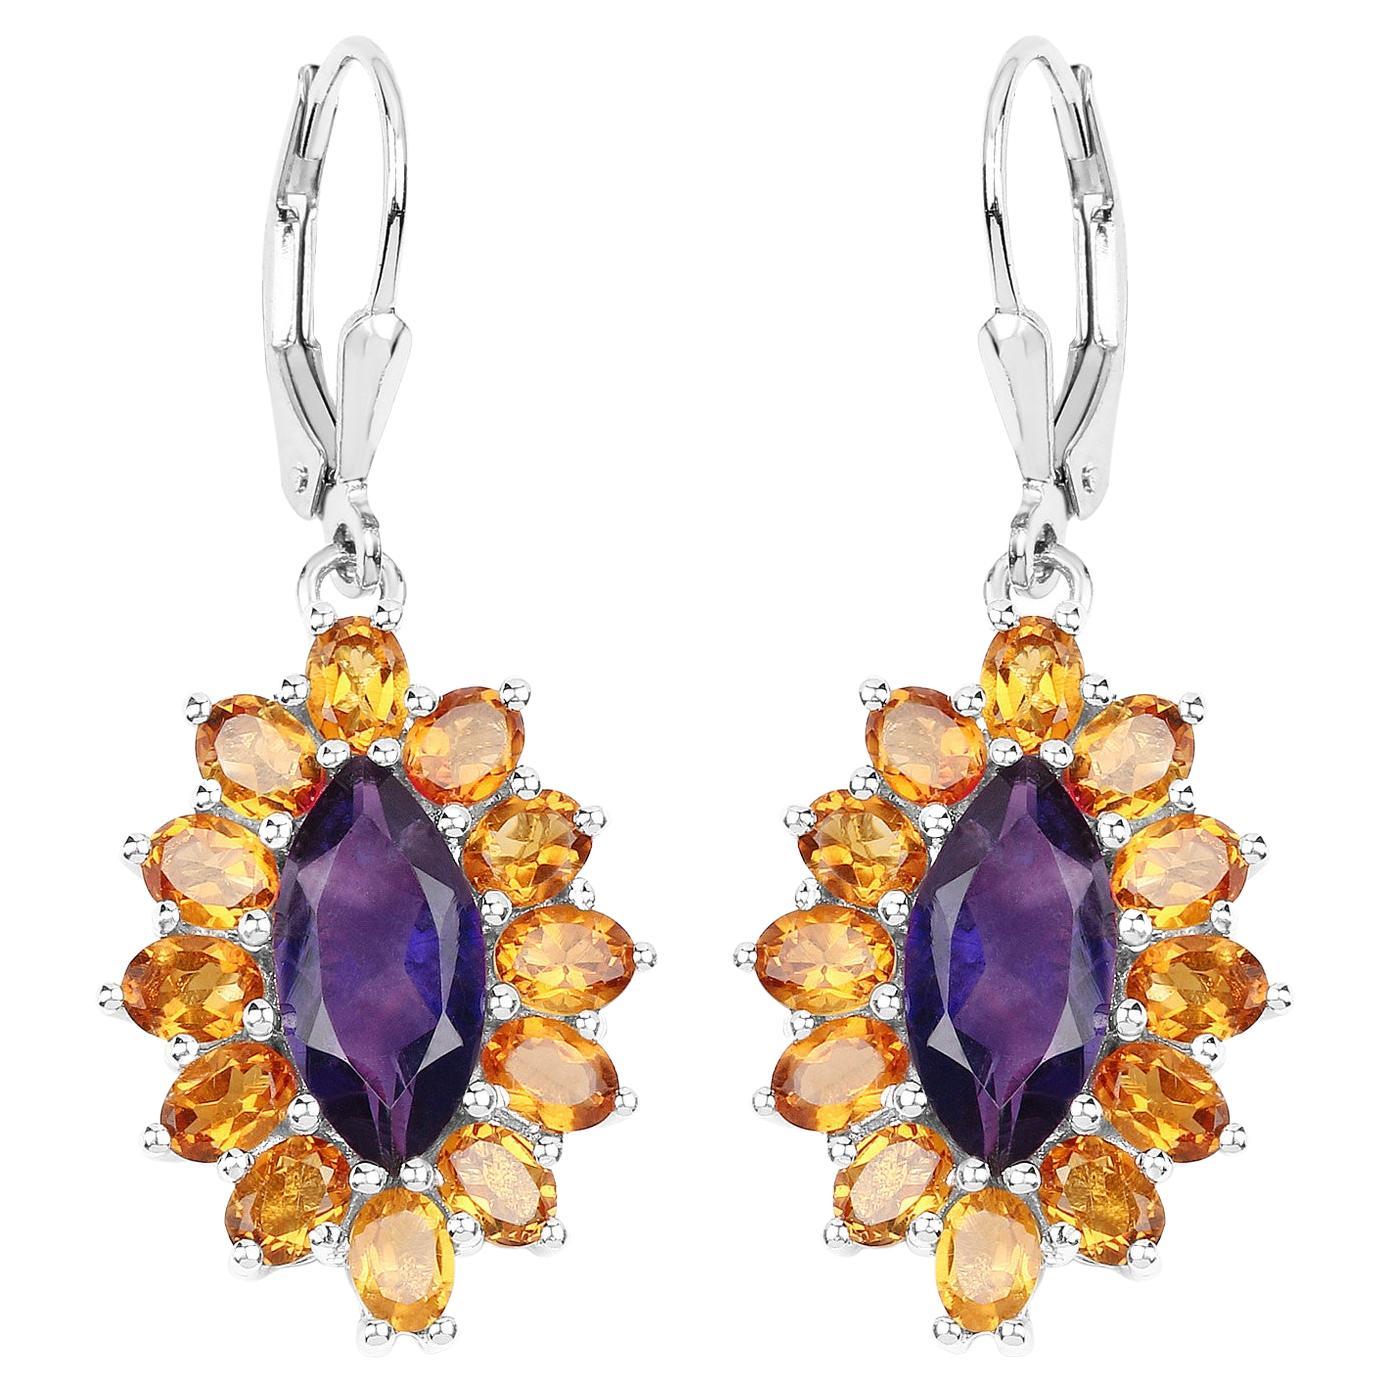 Natural 6.55 Carat Madeira Citrine & Amethyst Dangle Earrings Sterling Silver